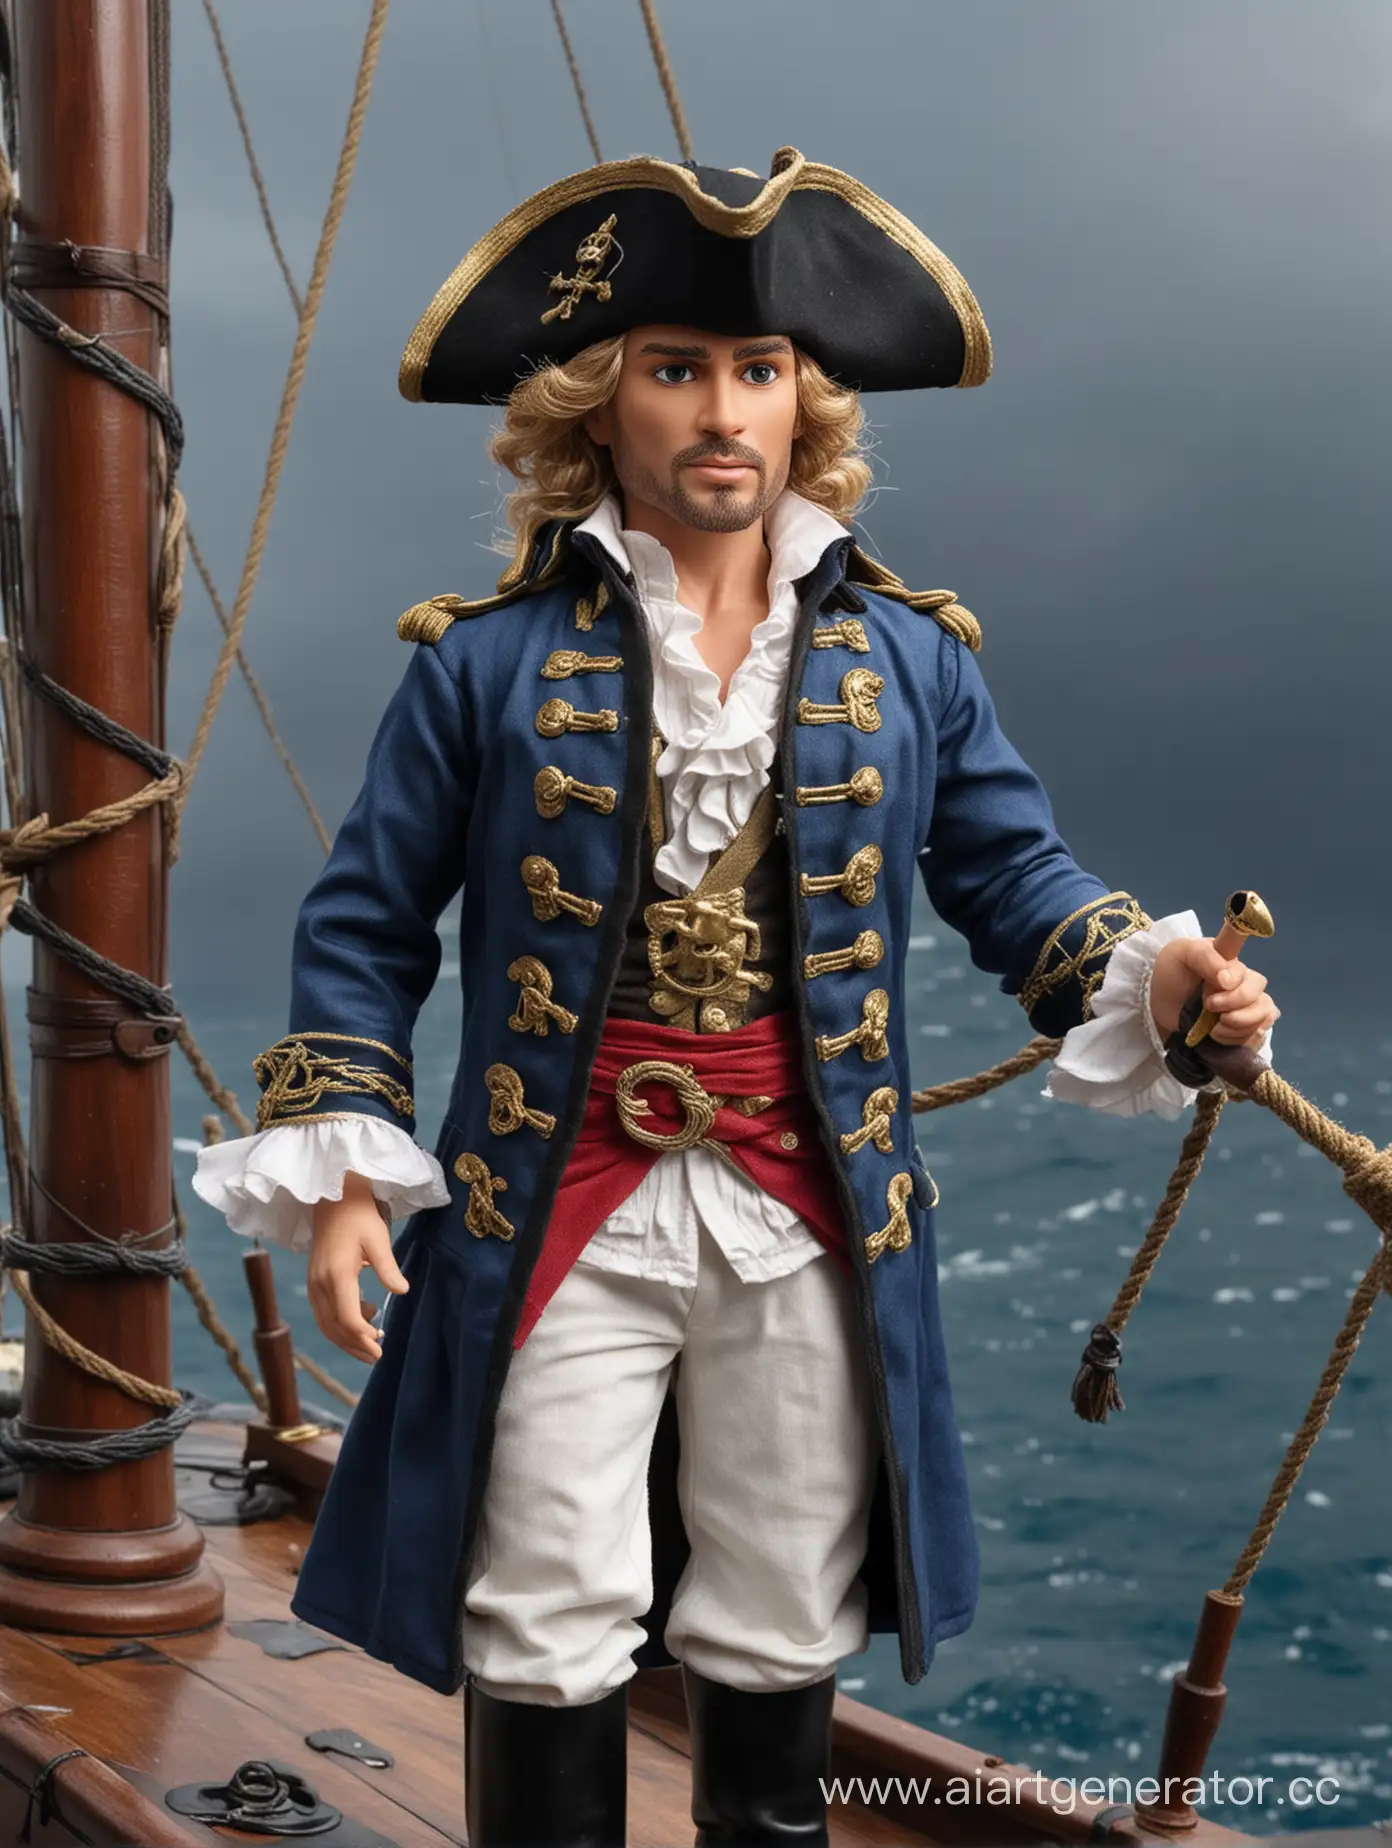 Captain-Norrington-Aboard-a-Royal-Ship-in-a-Storm-Pirates-of-the-Caribbean